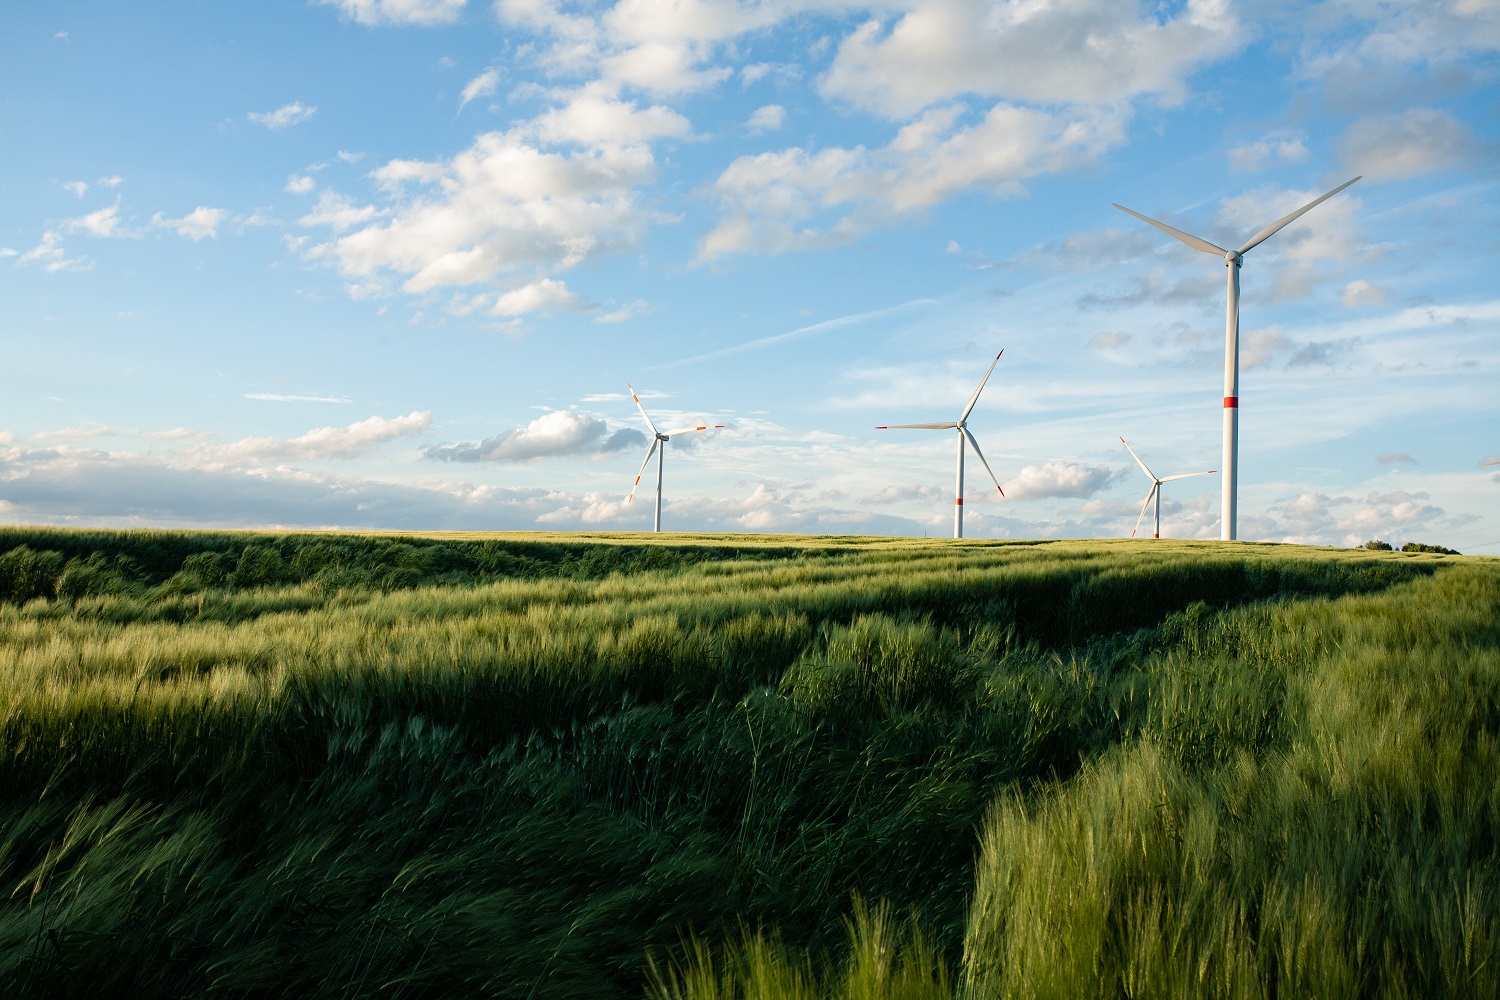 Renewable energy sources are important elements of the energy security of municipalities